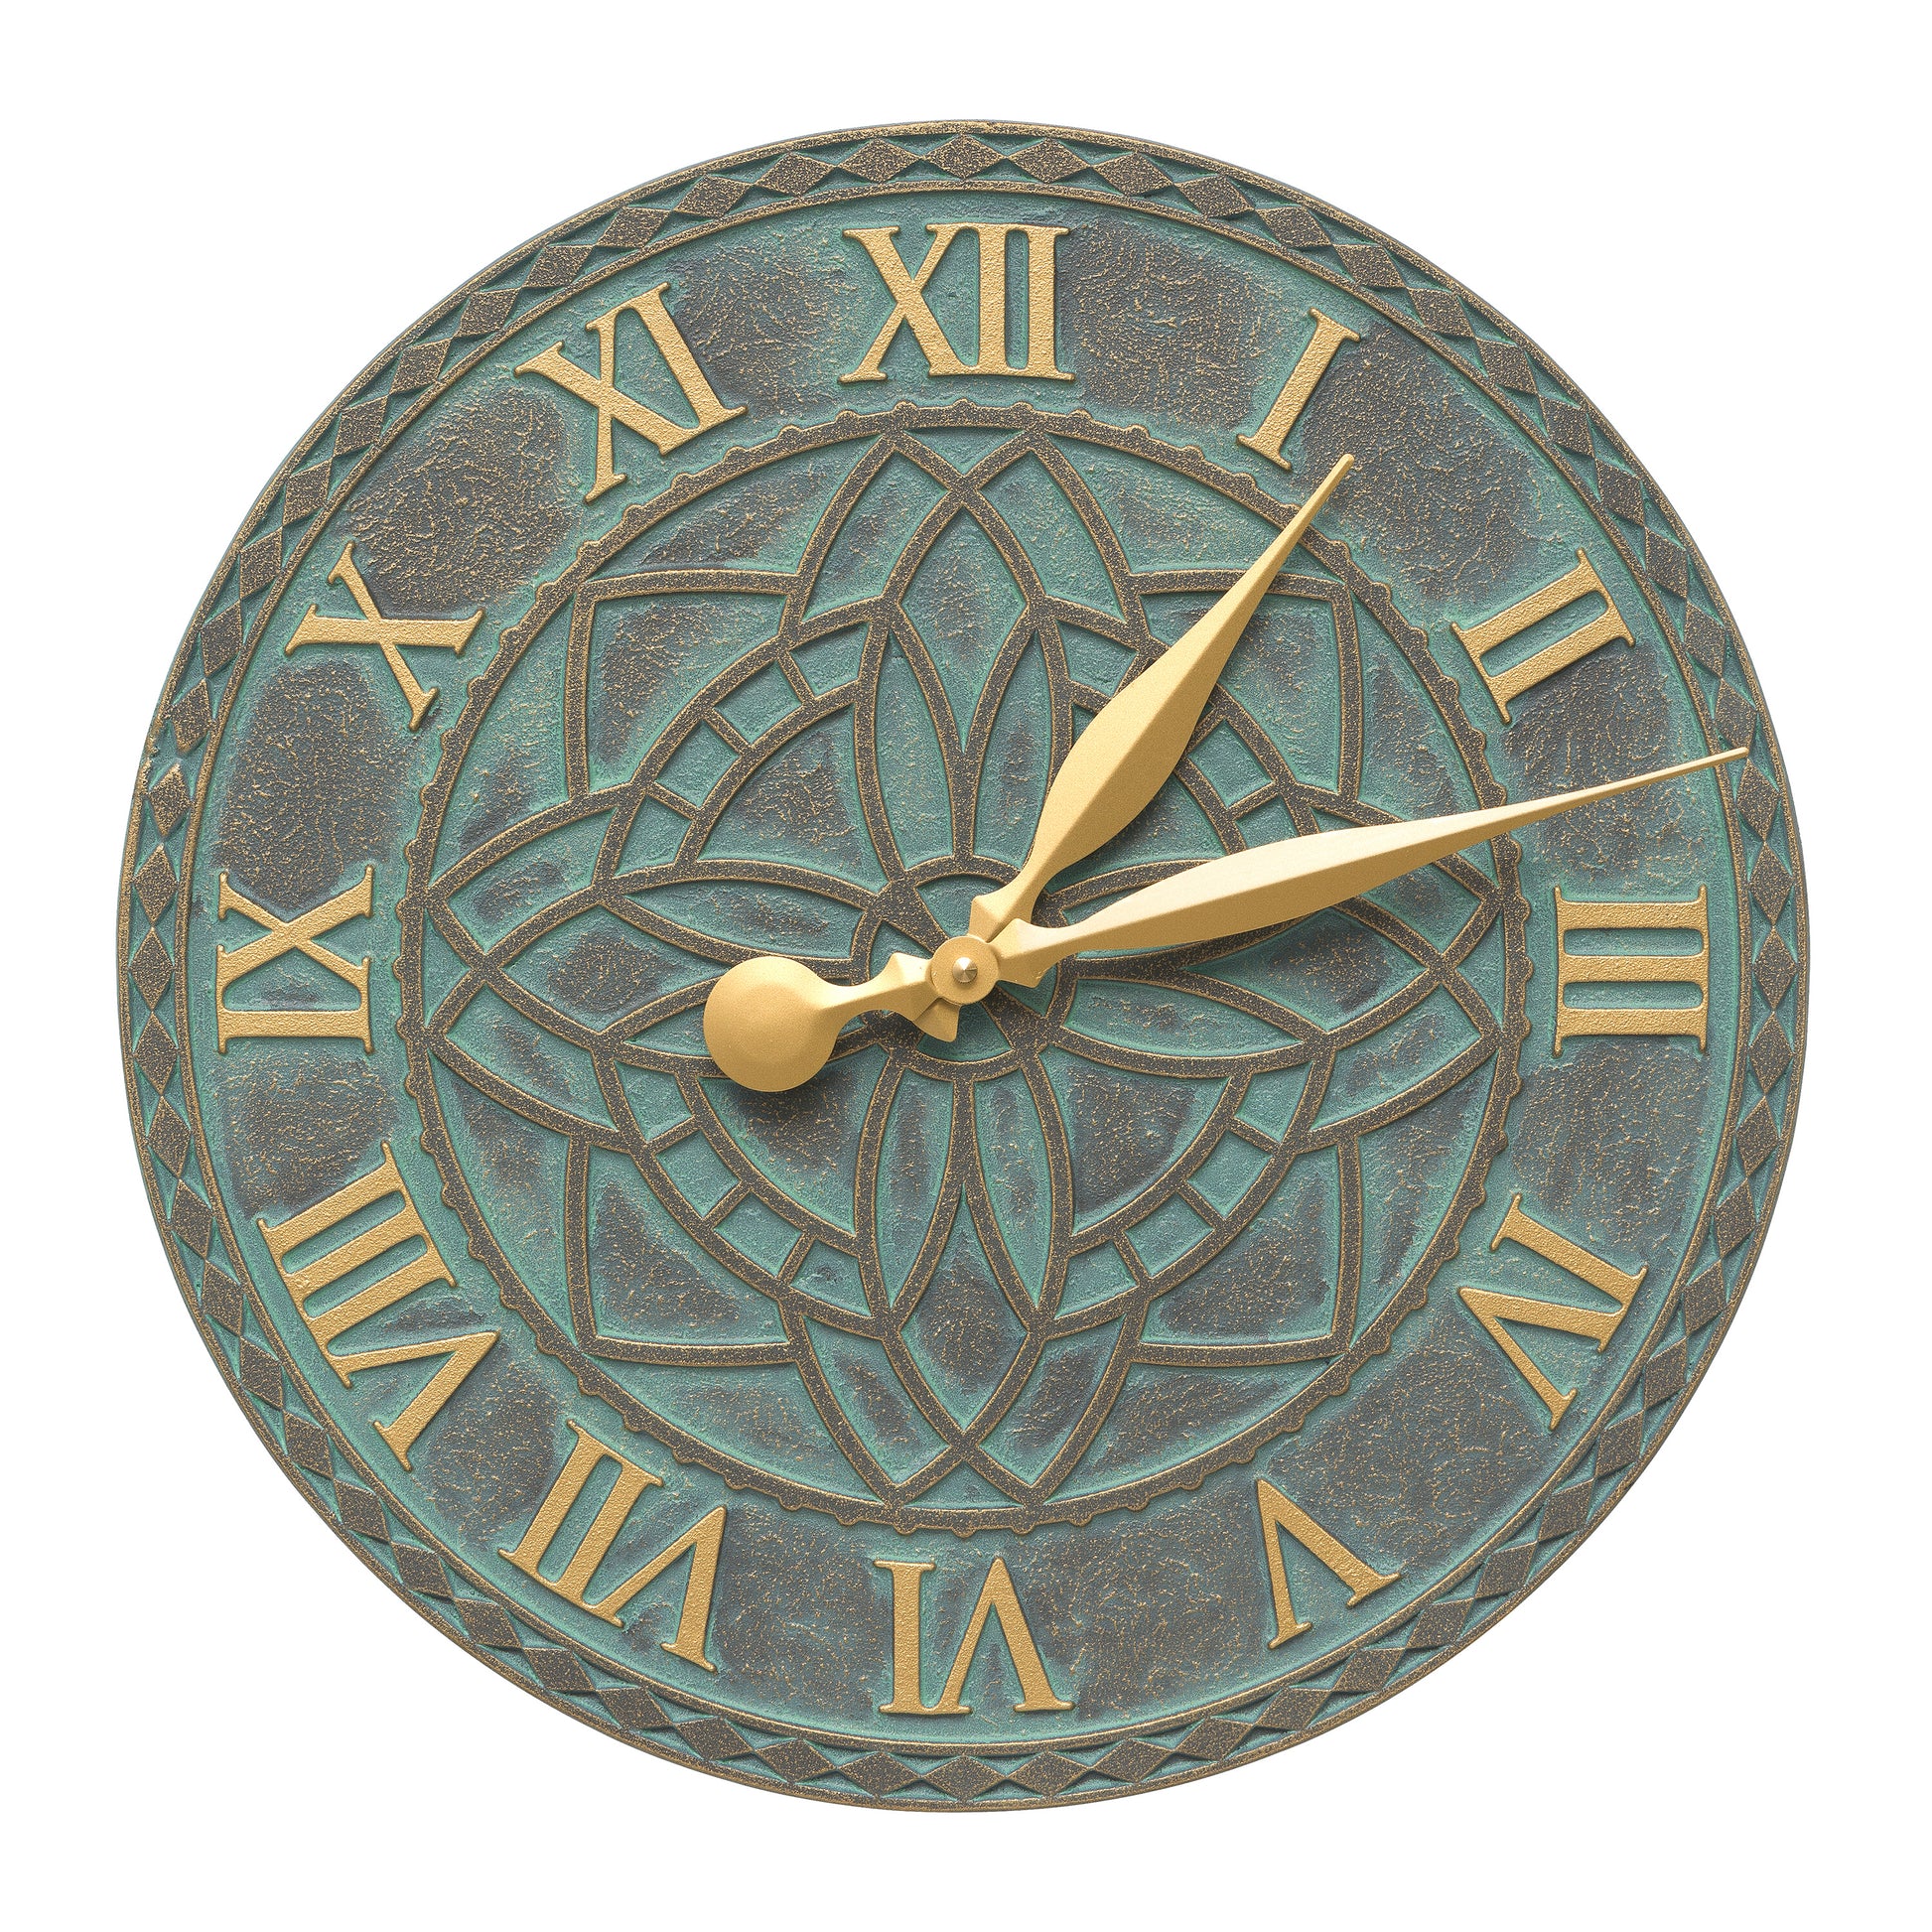 Whitehall Products Artisan 16 Wall Clock Black/gold